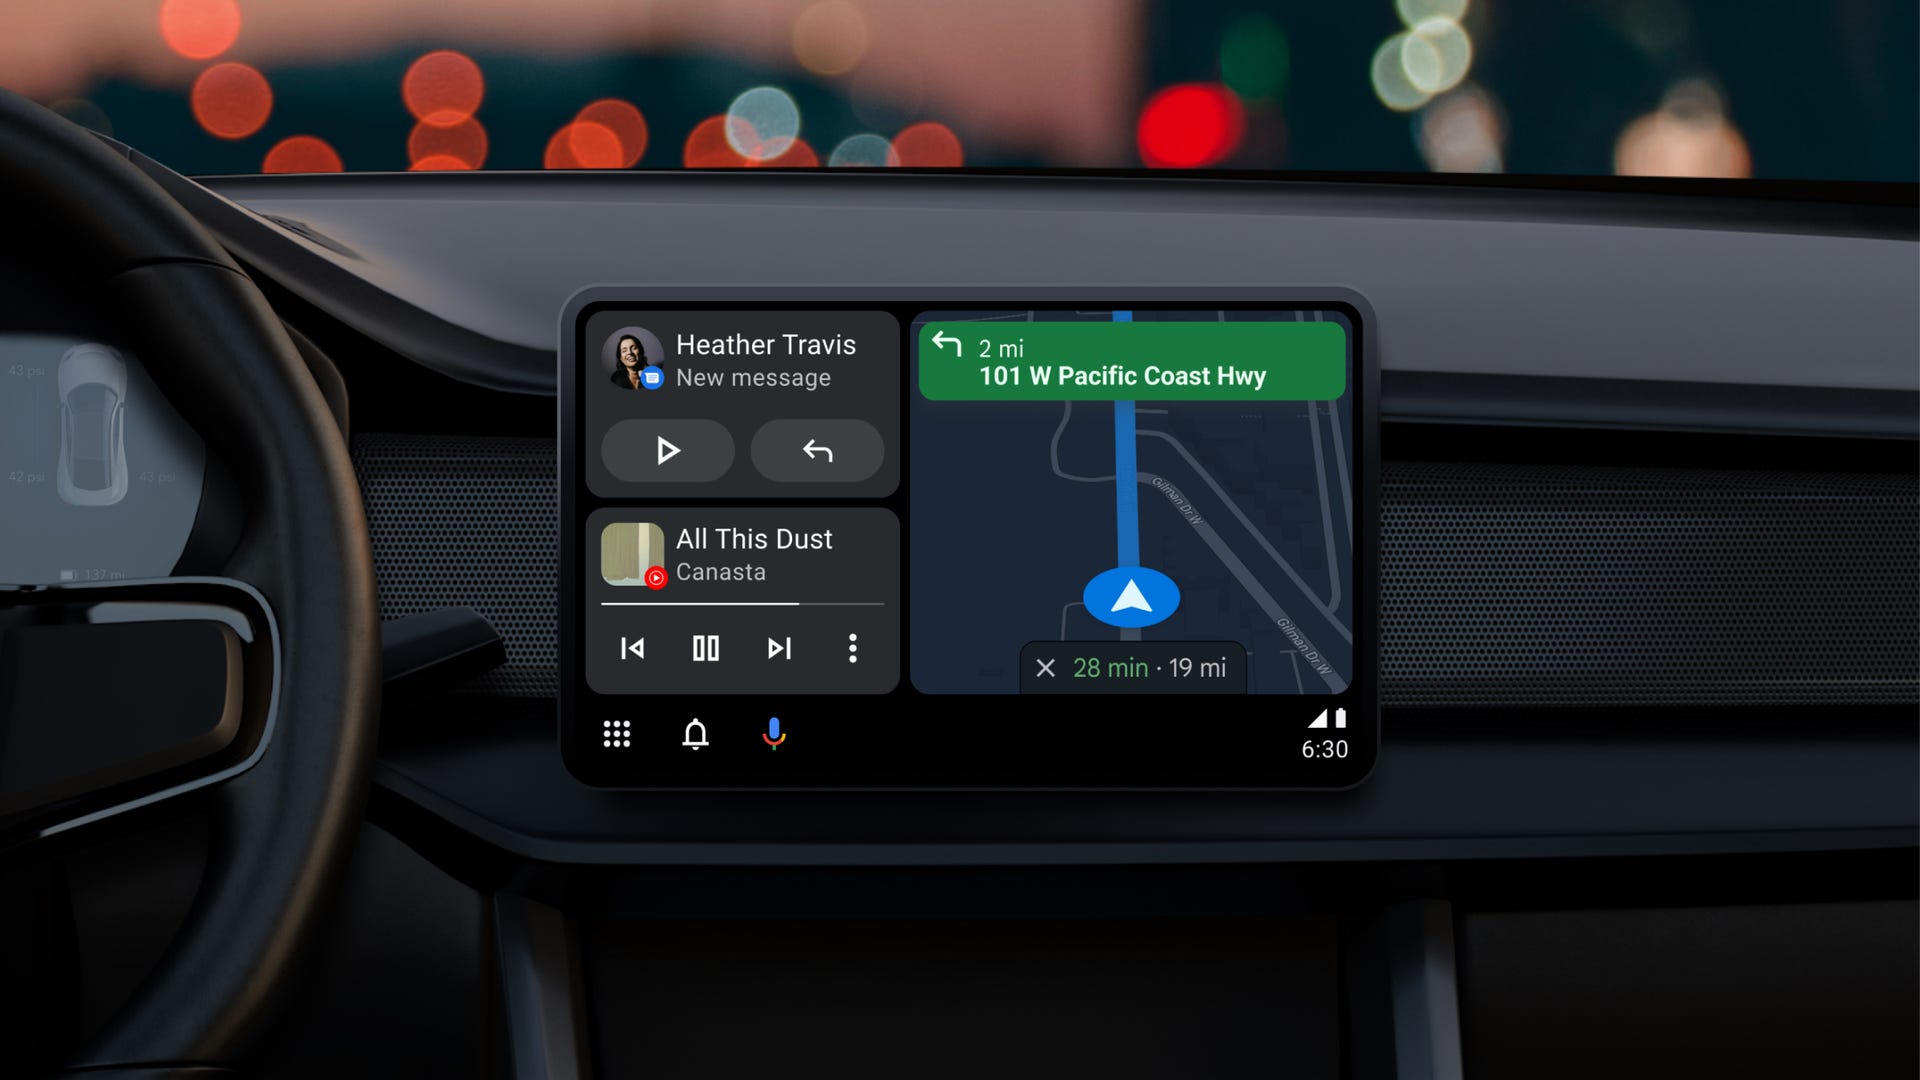 New Split Screen Android Auto Redesign Coming This Summer - CNET